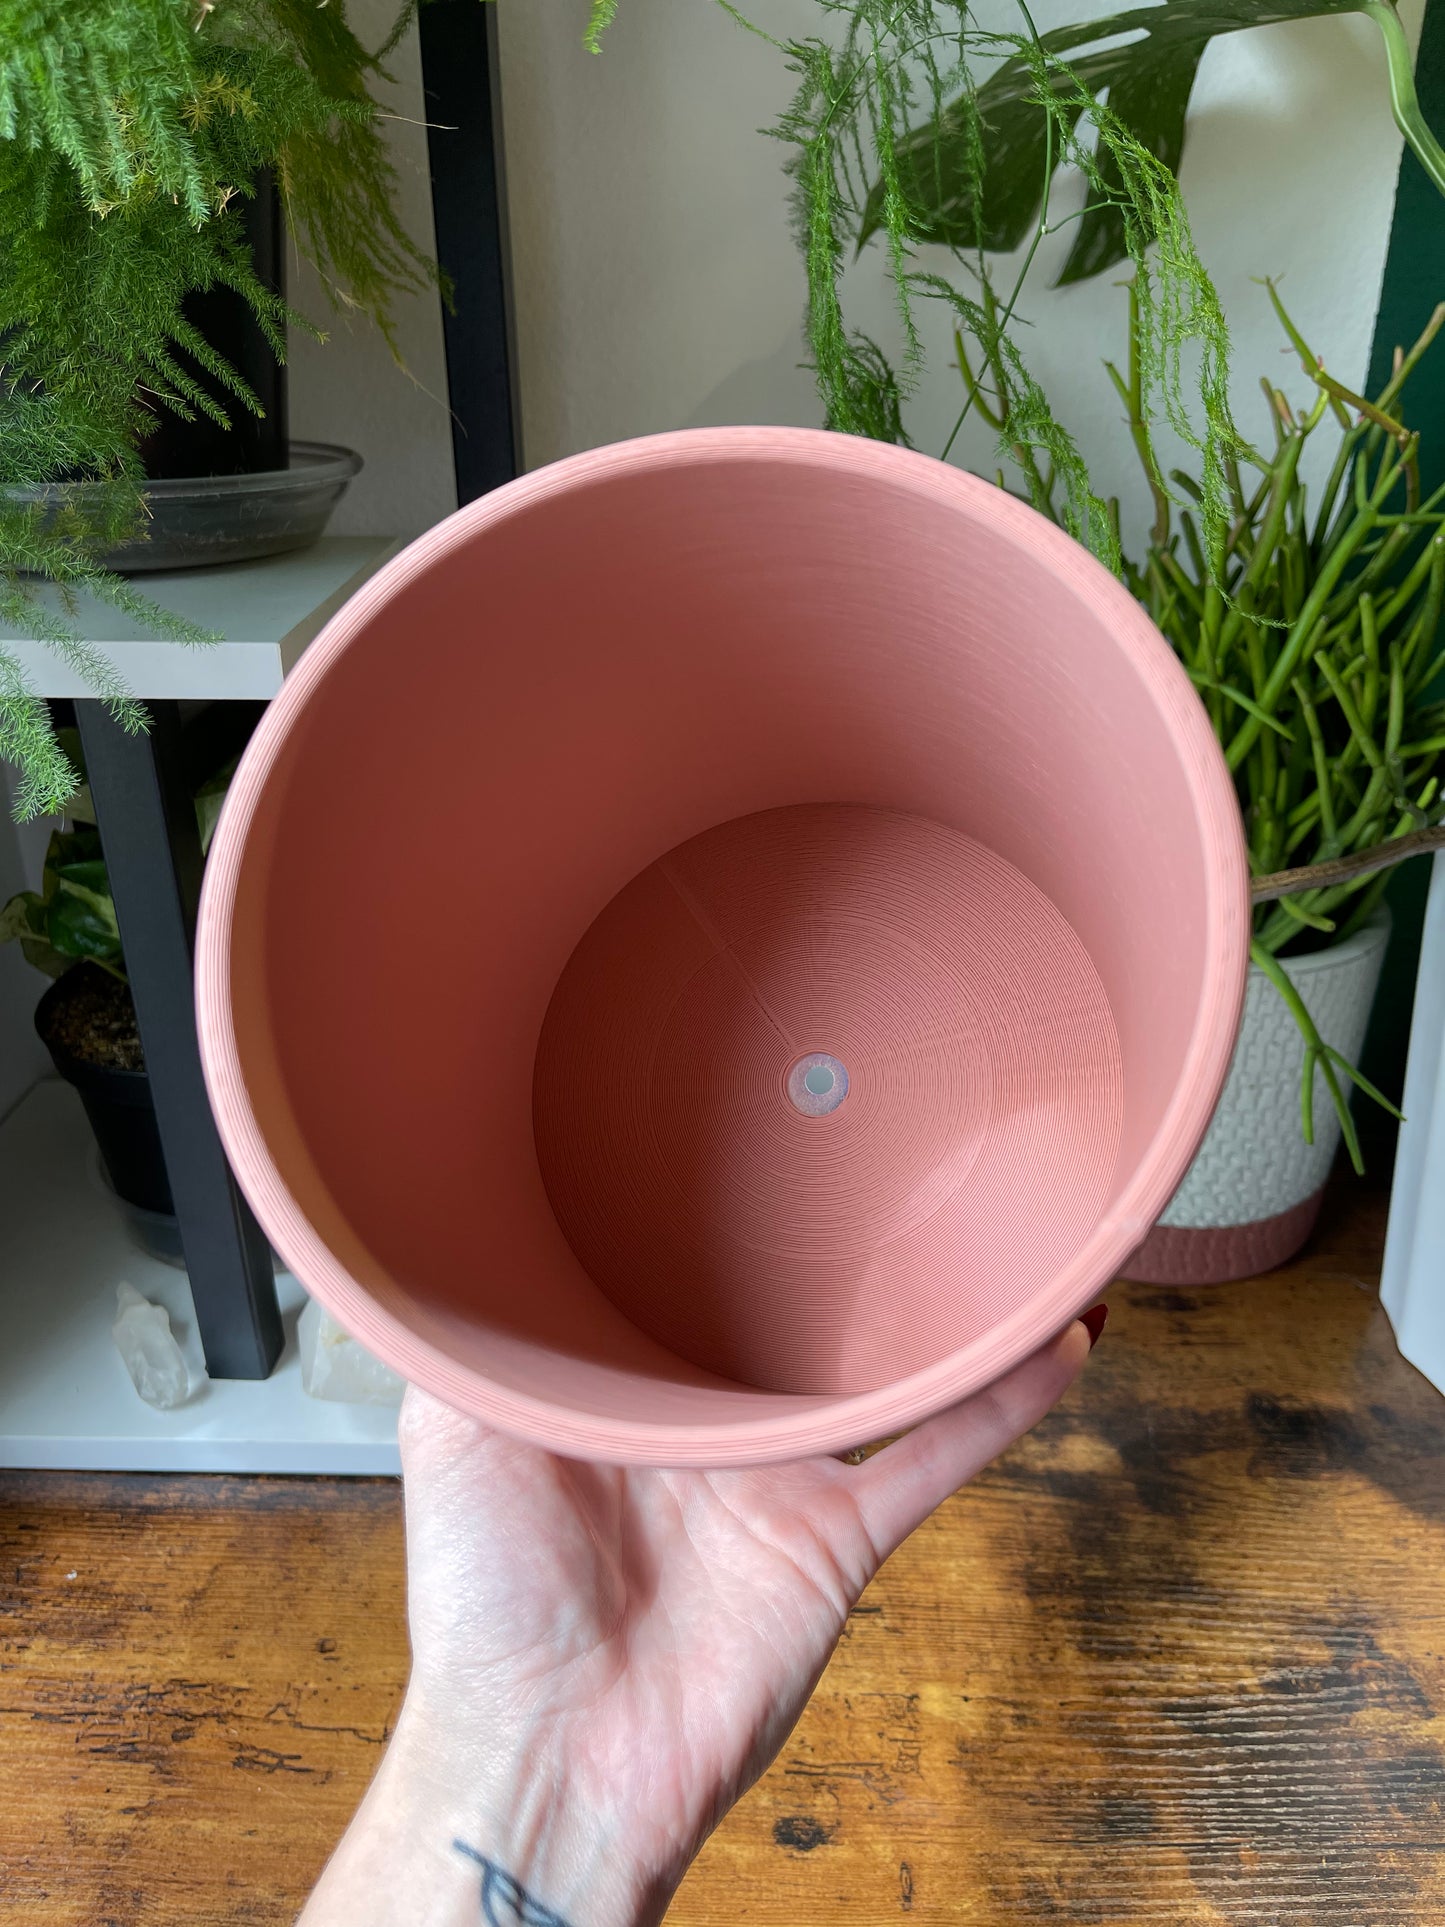 3D Printed Planter from Plant Based Materials